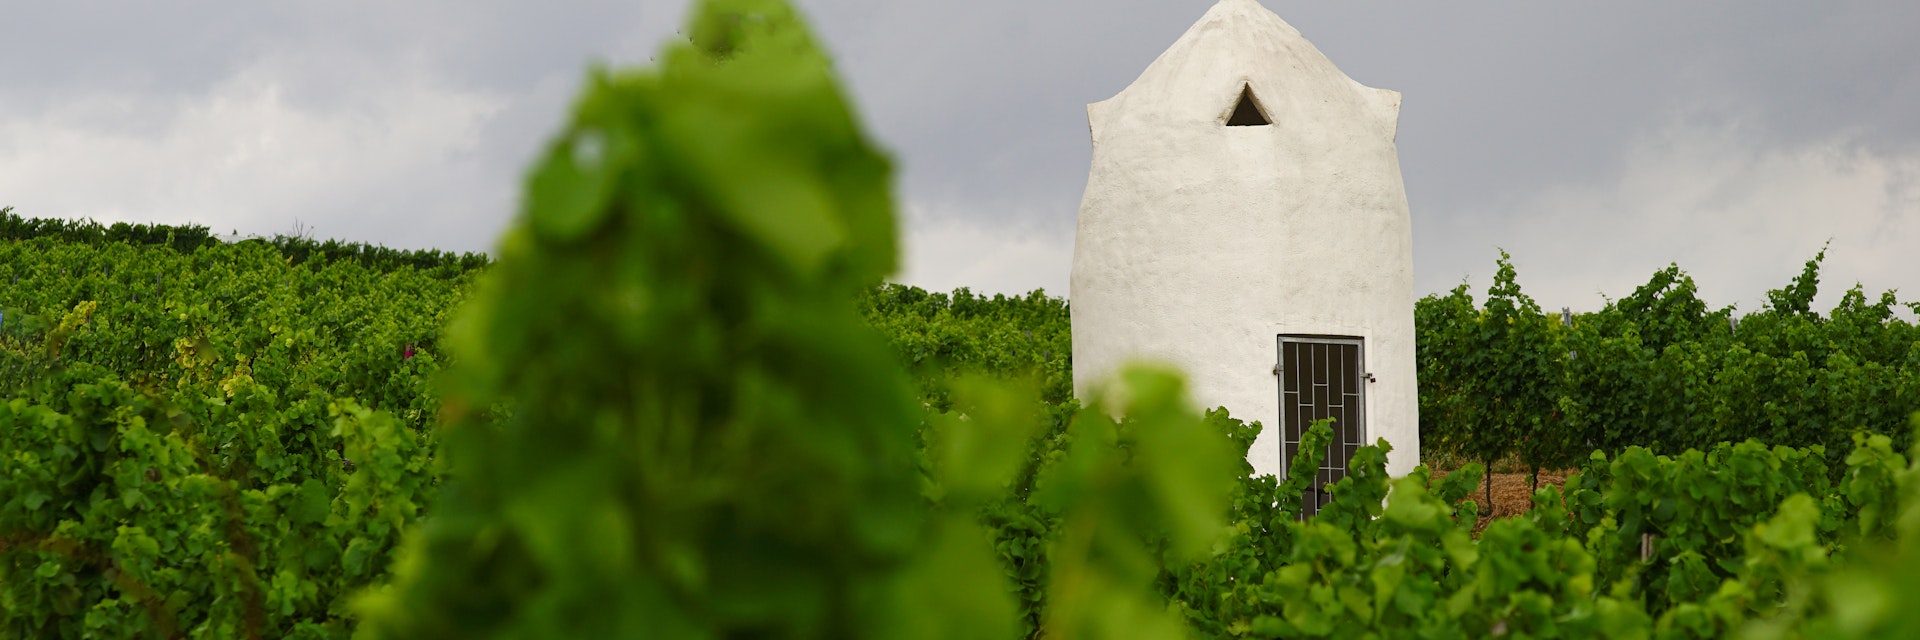 Rheinhessischer Trullo (vineyard shelter for the winemaker working in the vineyard) in case of approaching storm.